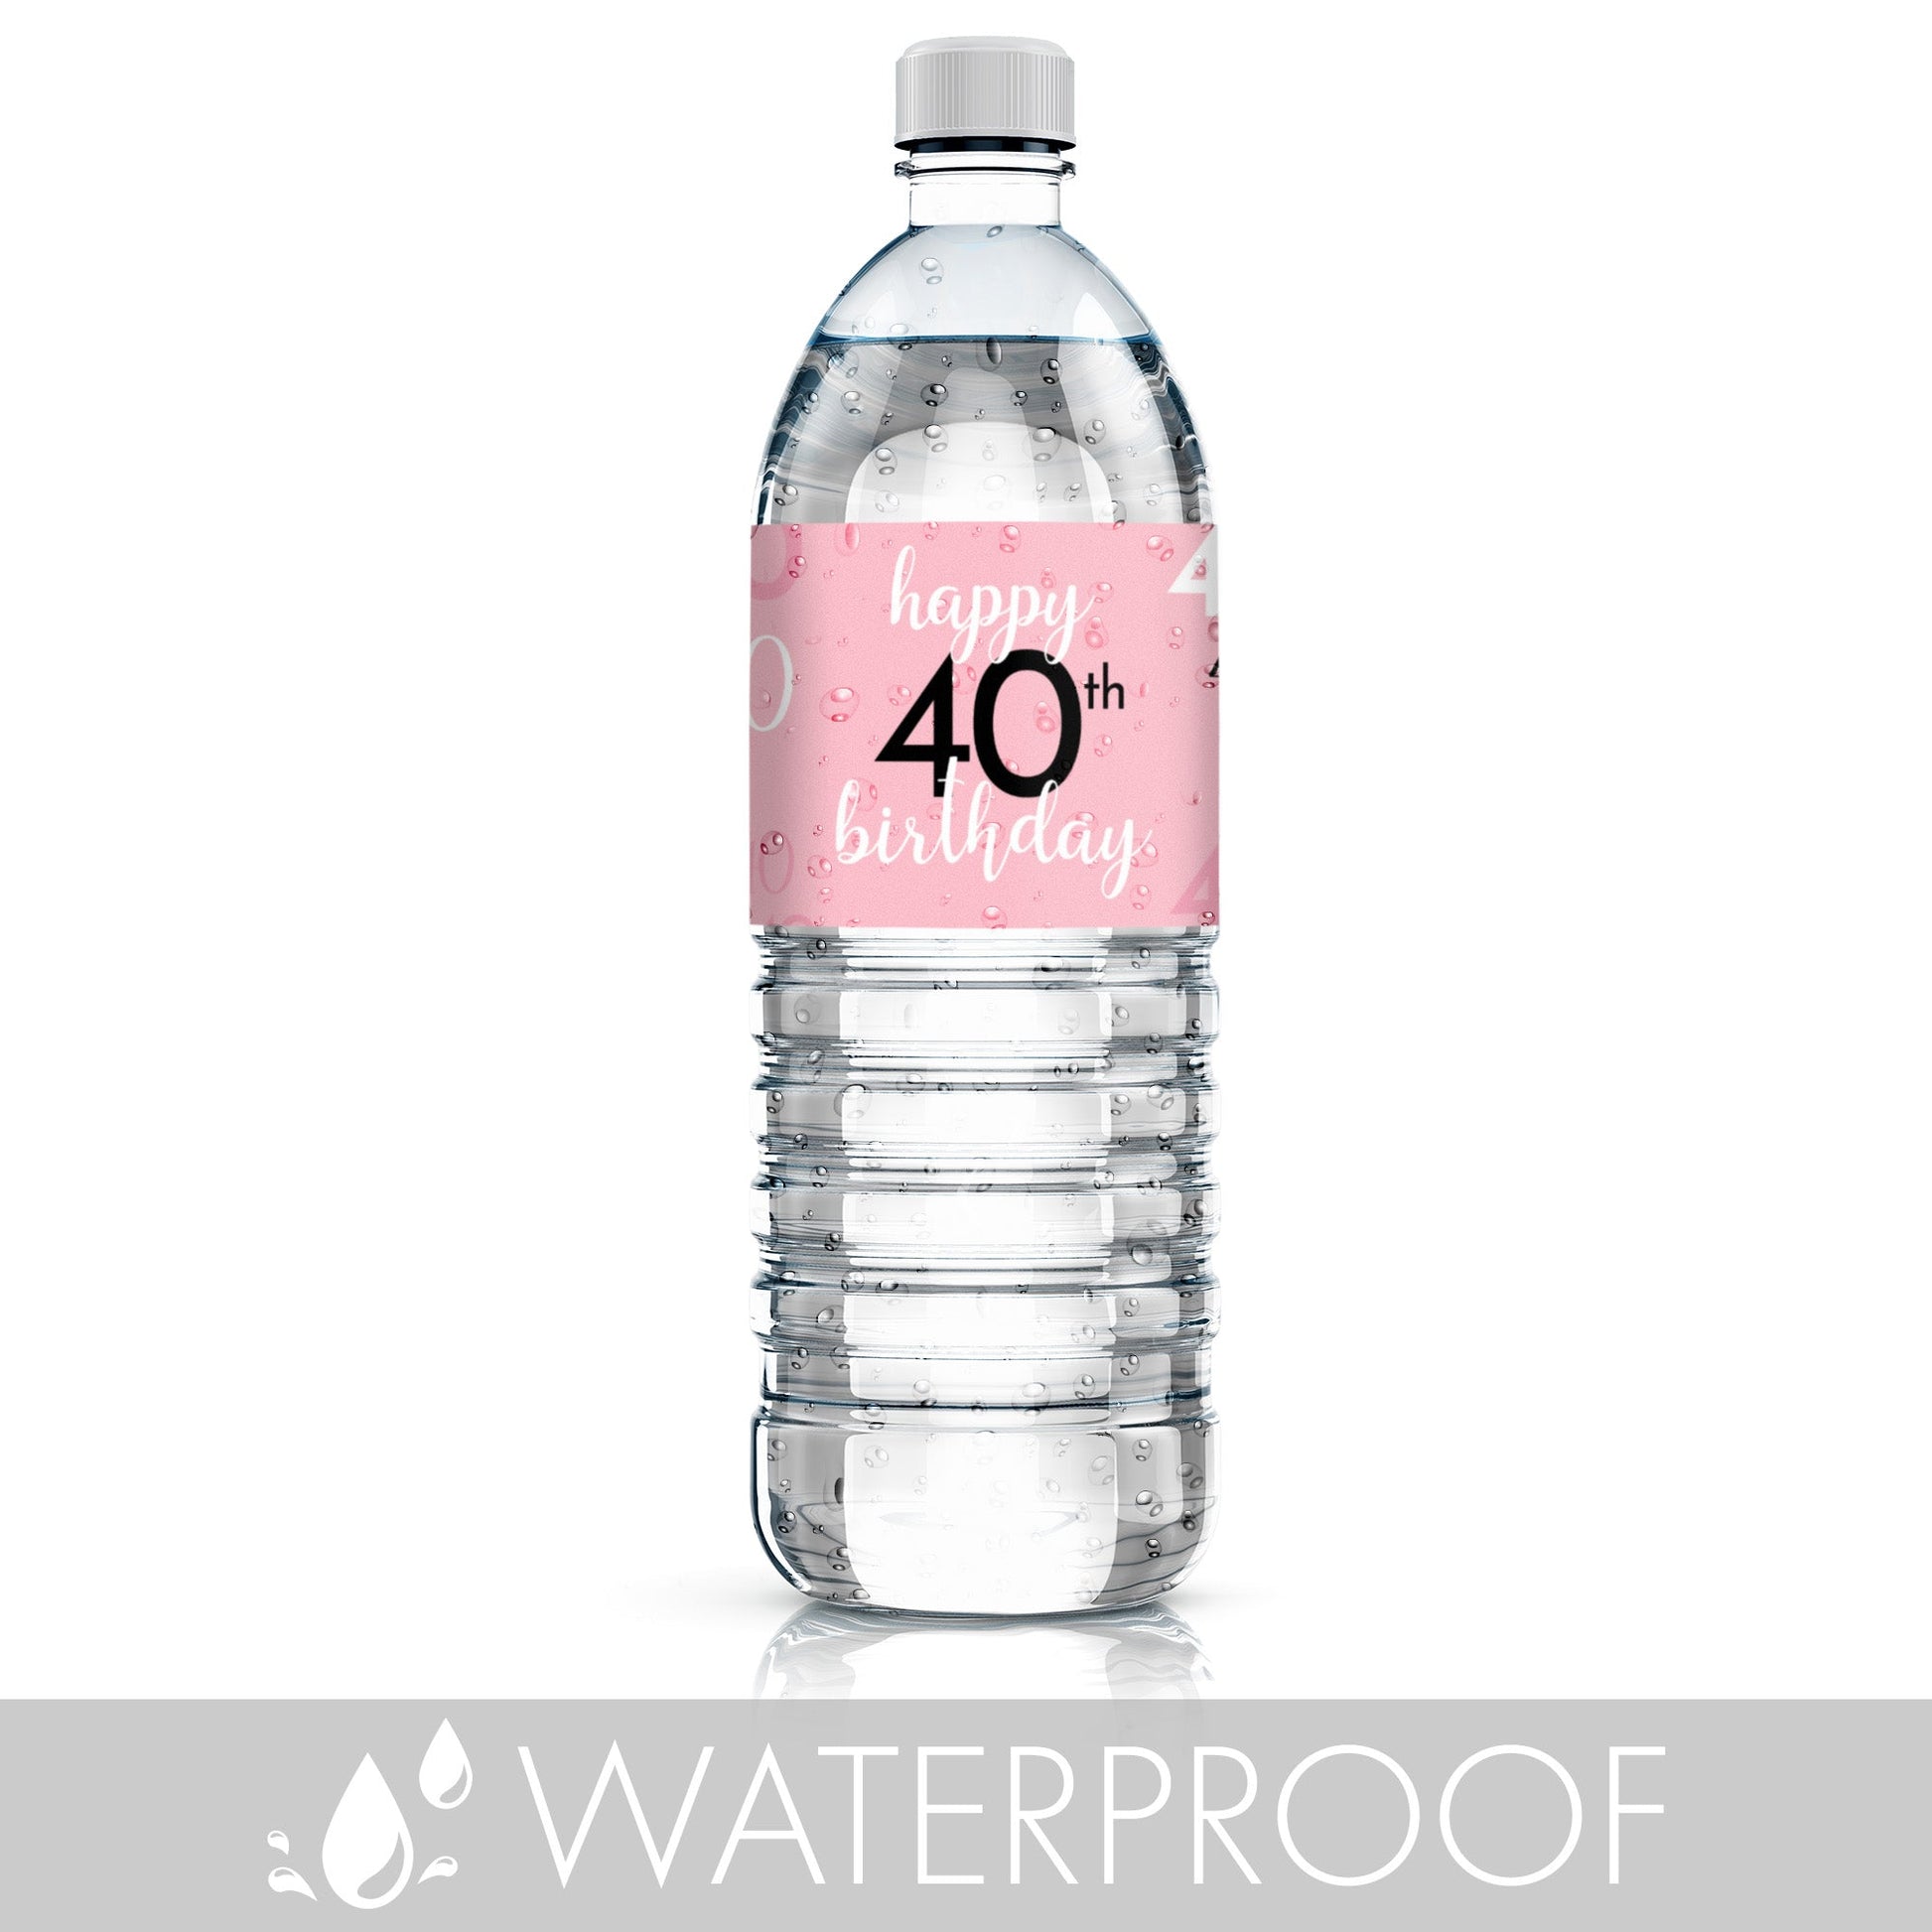 Personalize your water bottles with waterproof labels in a stylish 40th pink and black design